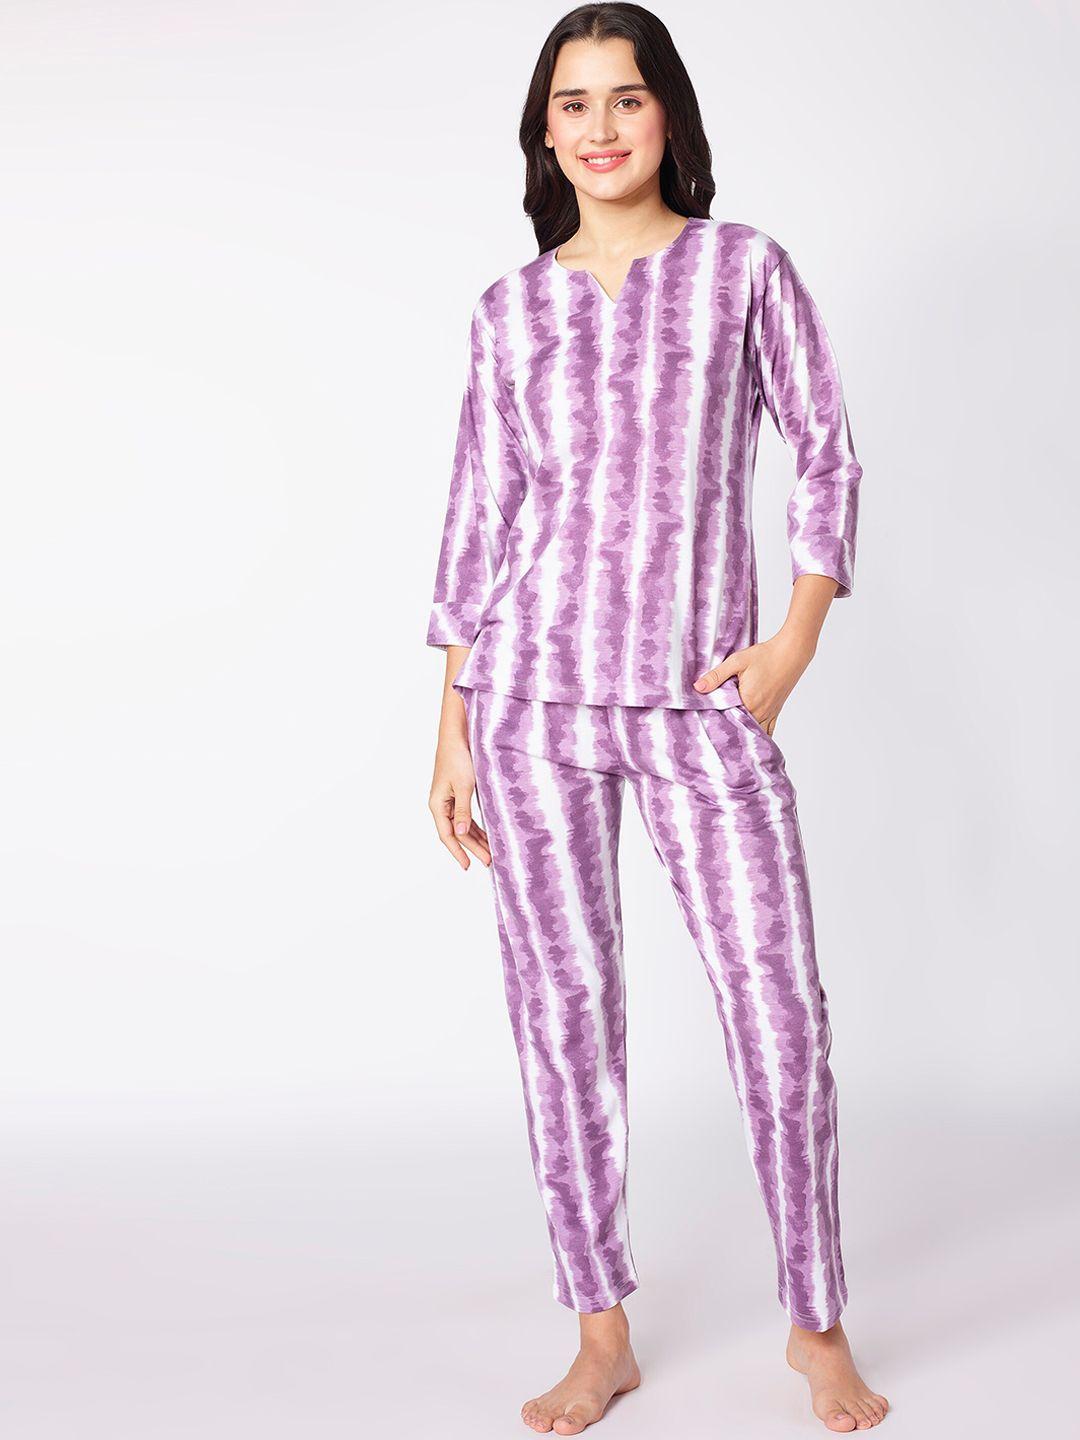 beebelle purple & white tie and dye printed night suit